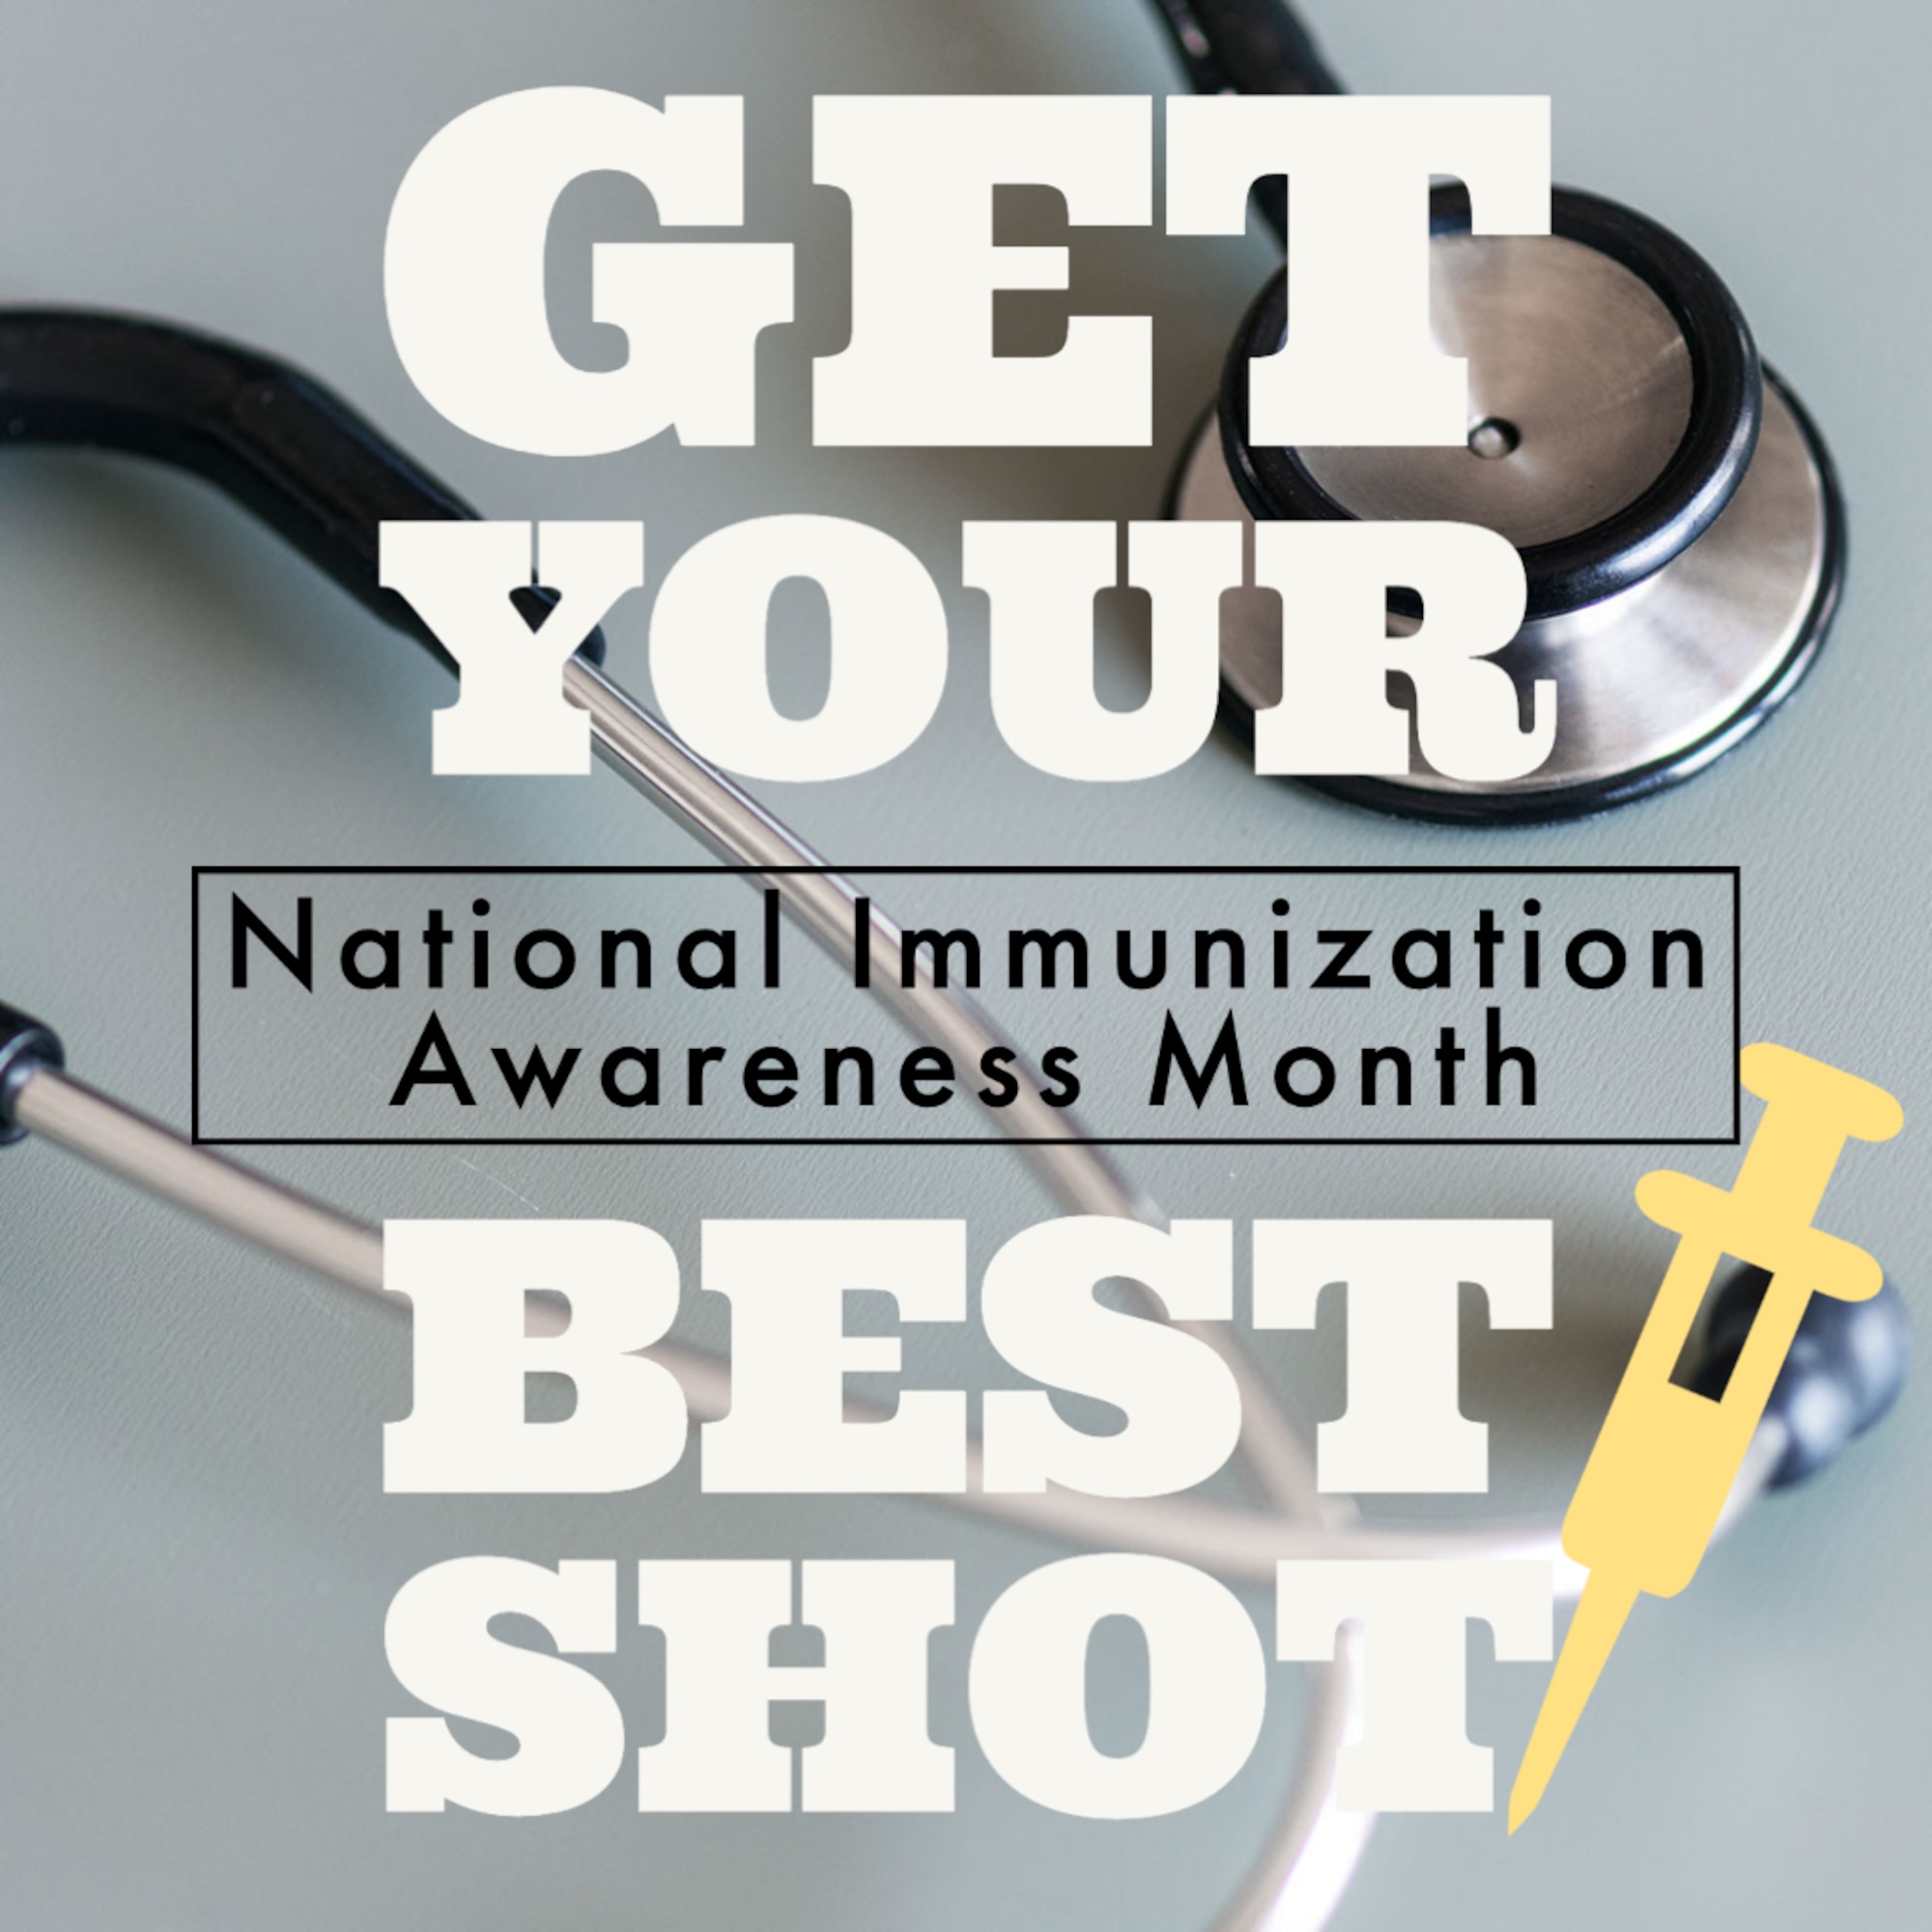 Graphic for National Immunization Awareness Month